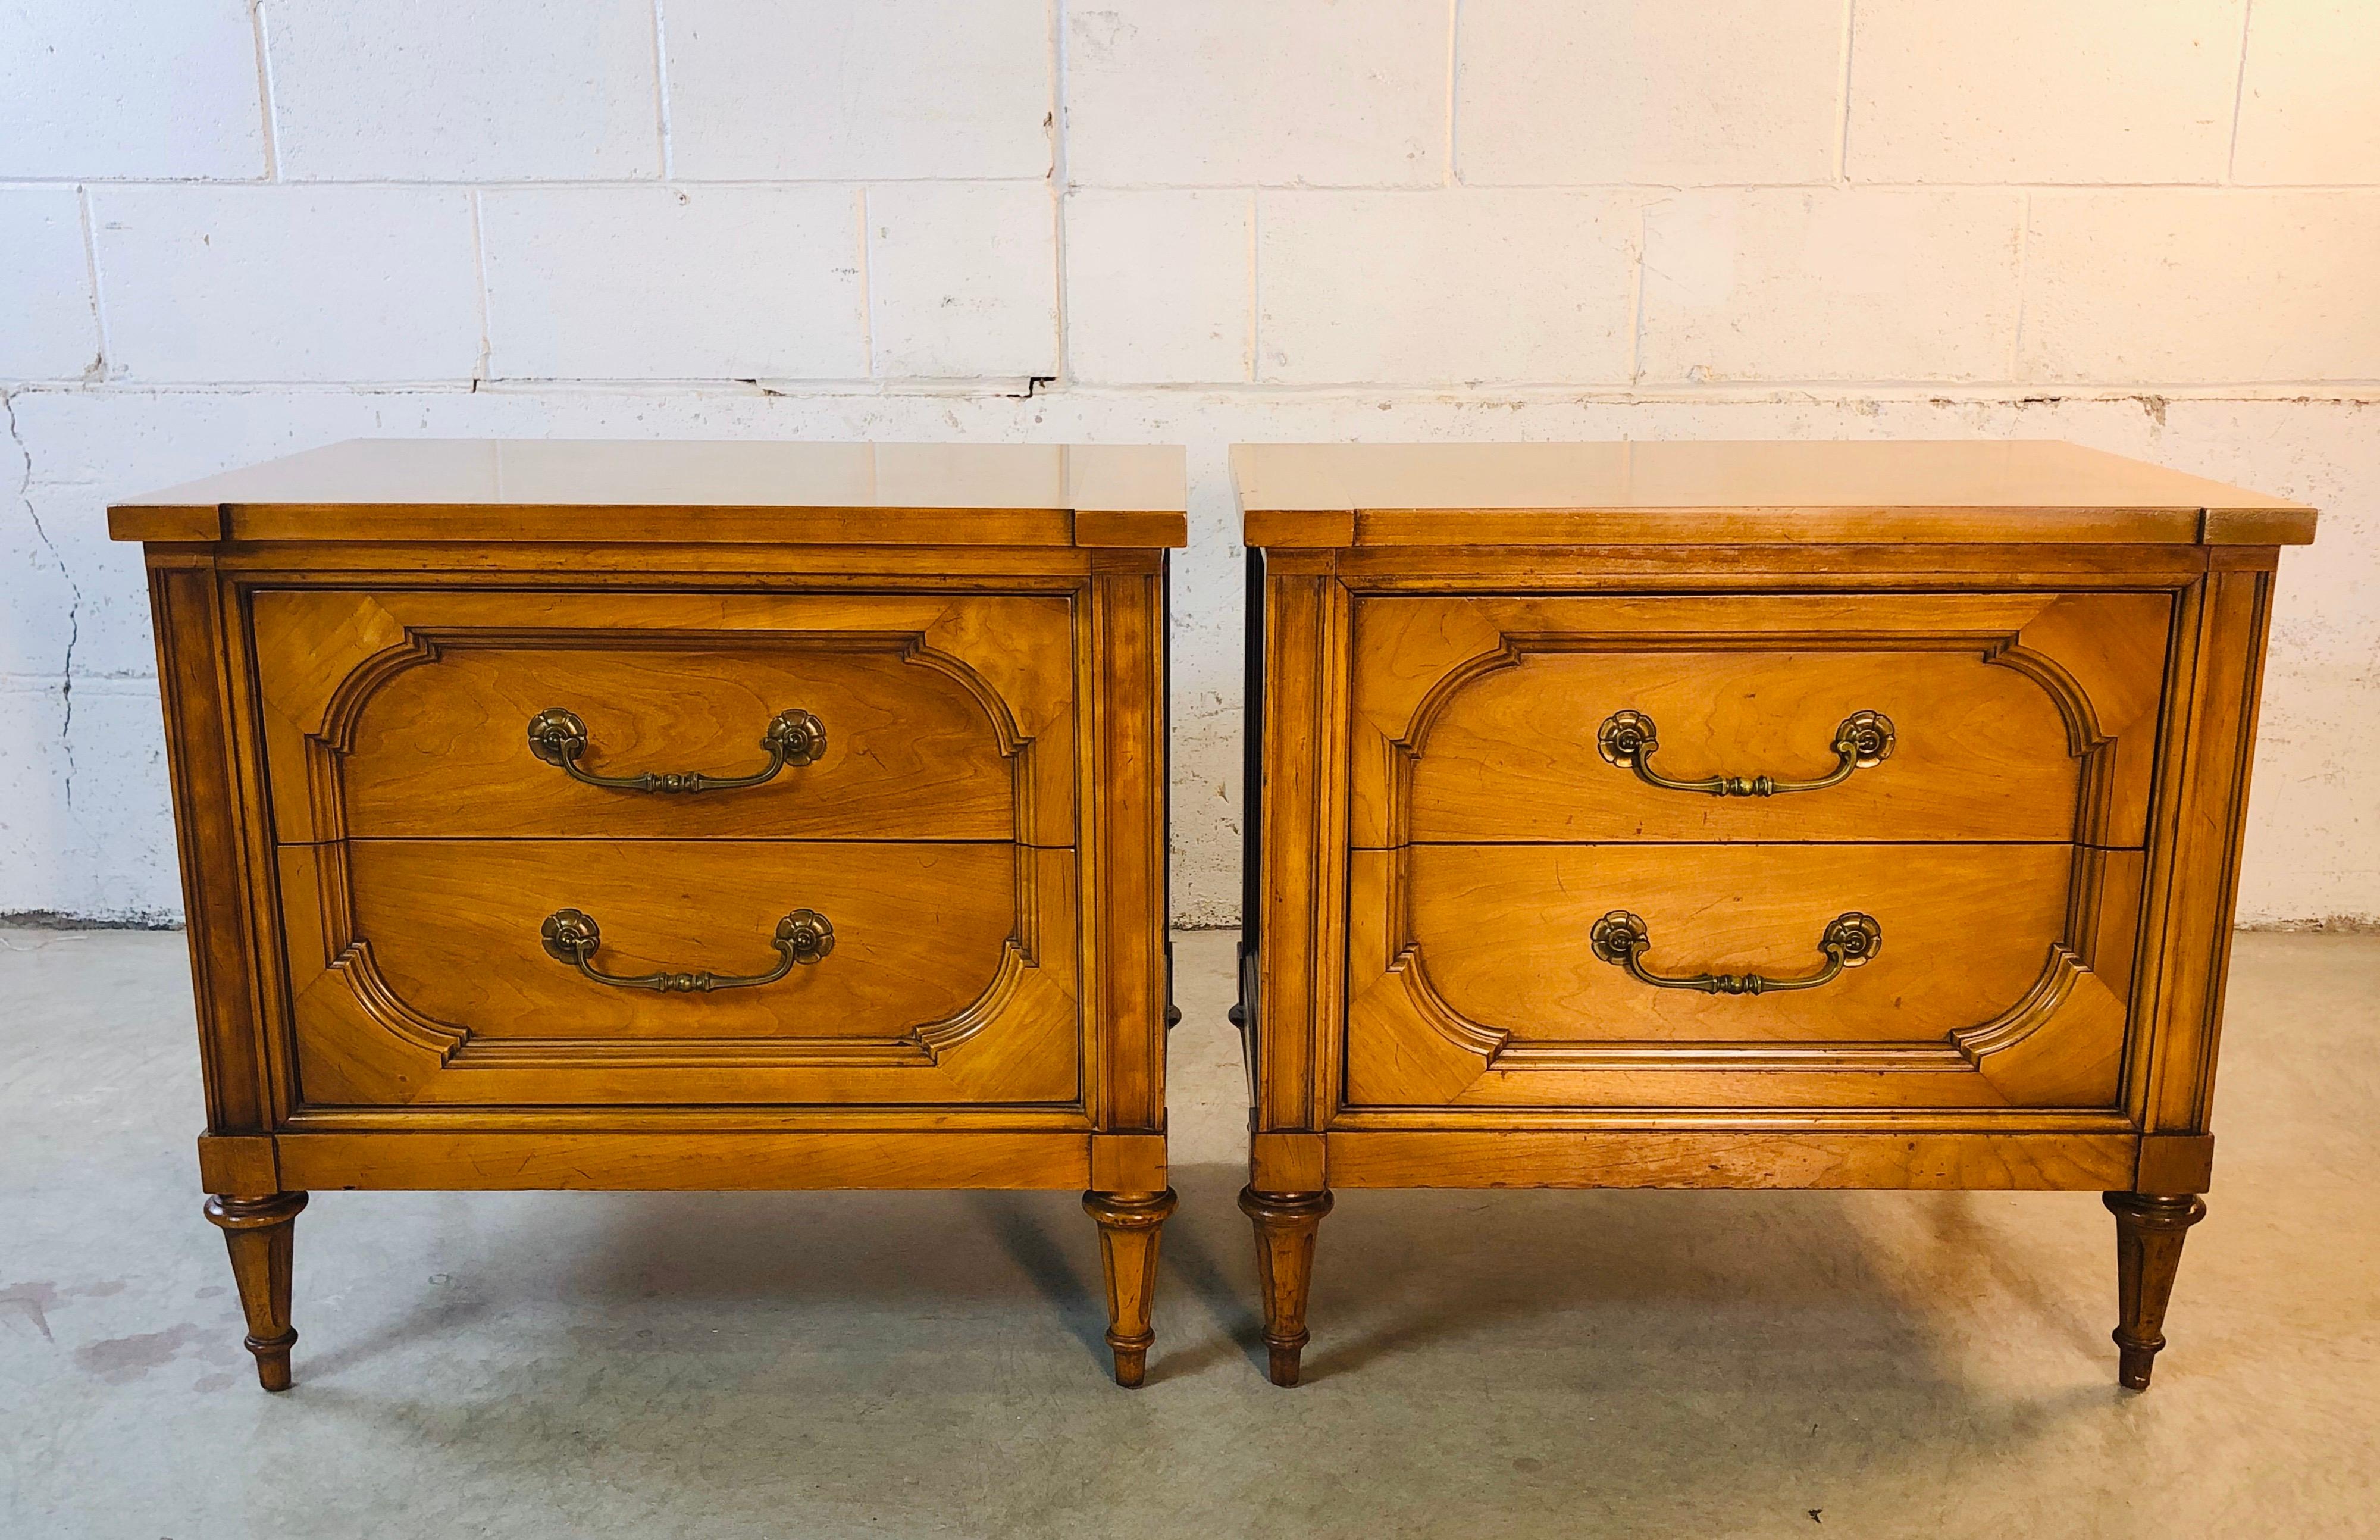 Vintage pair of nightstands by Century Furniture Co. both stands have two drawers for storage. They could also be used as end tables. They have a great grain design! They appear to be a mix of pecan and light mahogany wood. In very good used